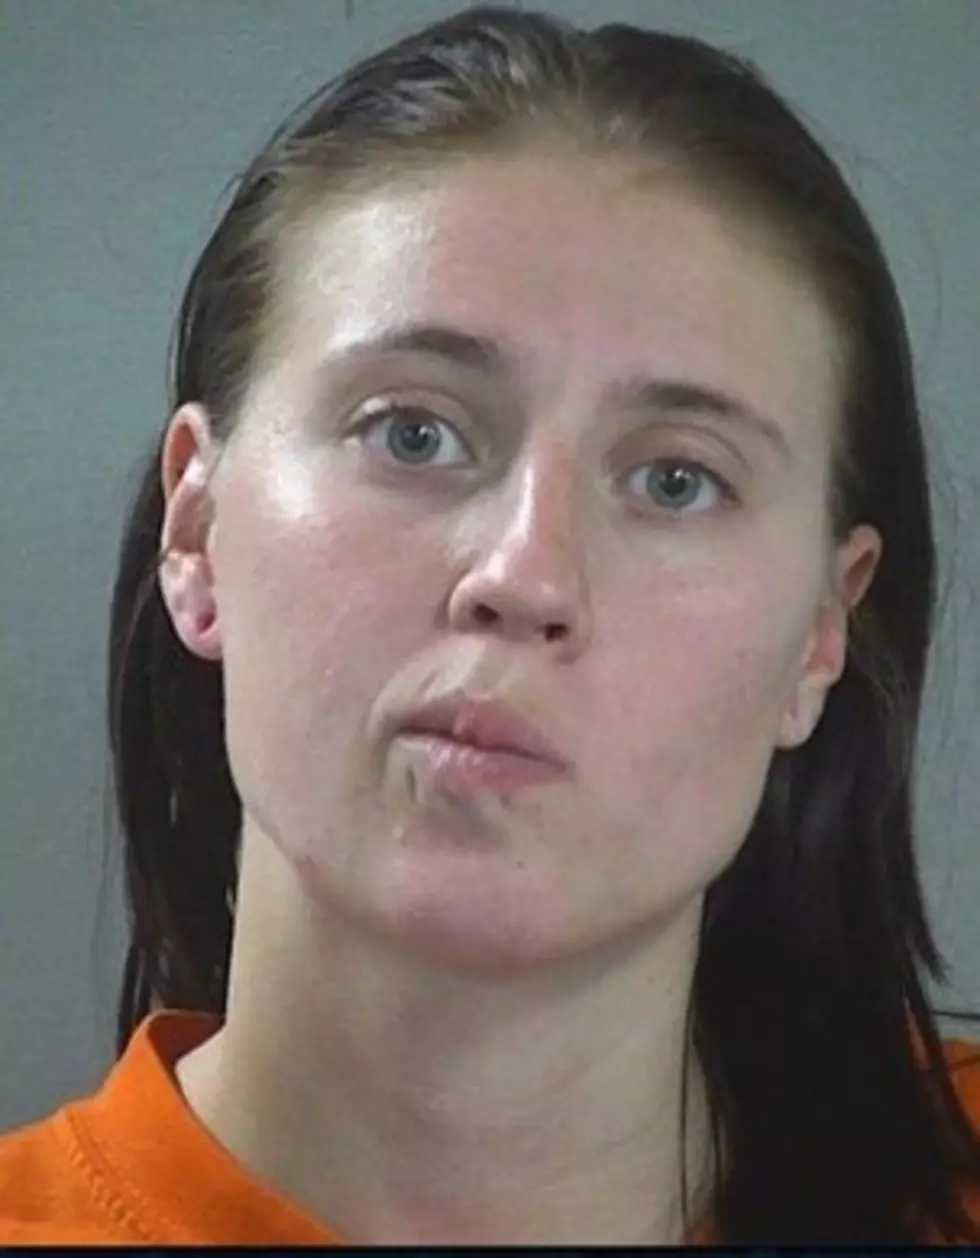 Caldwell Mom Starving Baby Sentenced to Probation